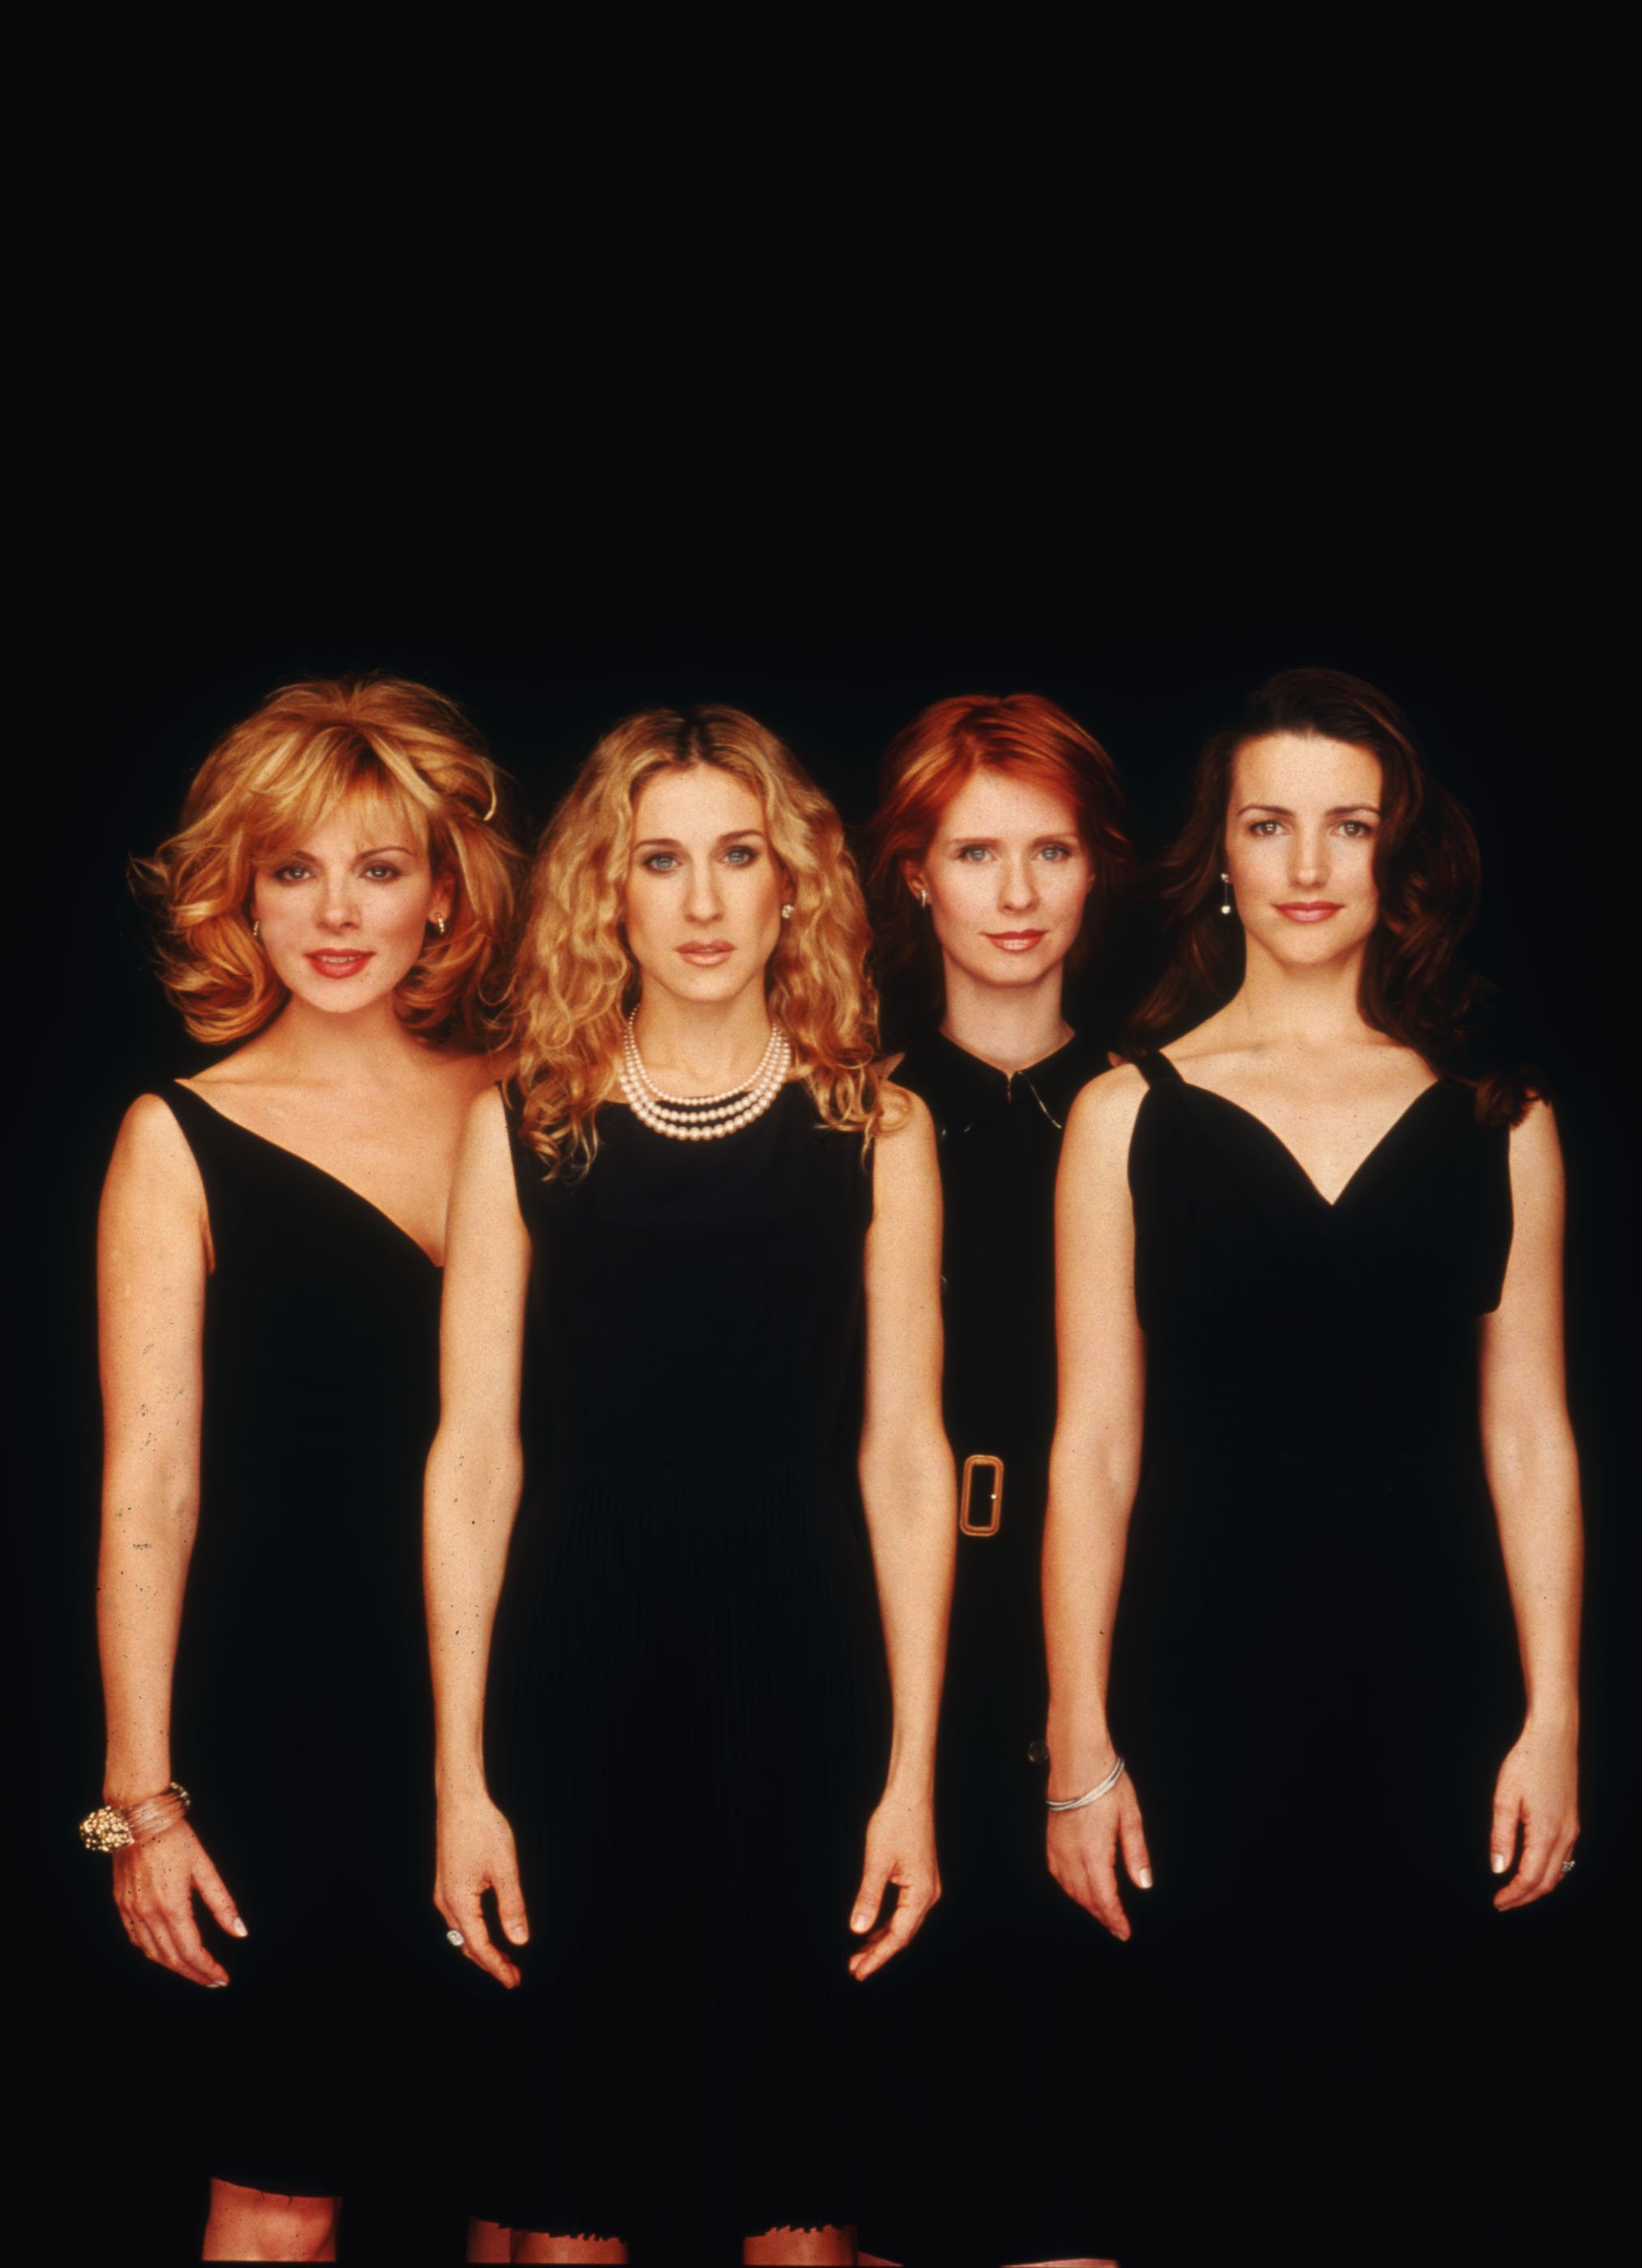 The stars of "Sex and The City", from left to right: Kim Cattral, Sarah Jessica Parker, Cynthia Nixon and Kristin Davis. The series aired between 1998 and 2004. | Photo: Getty Images.